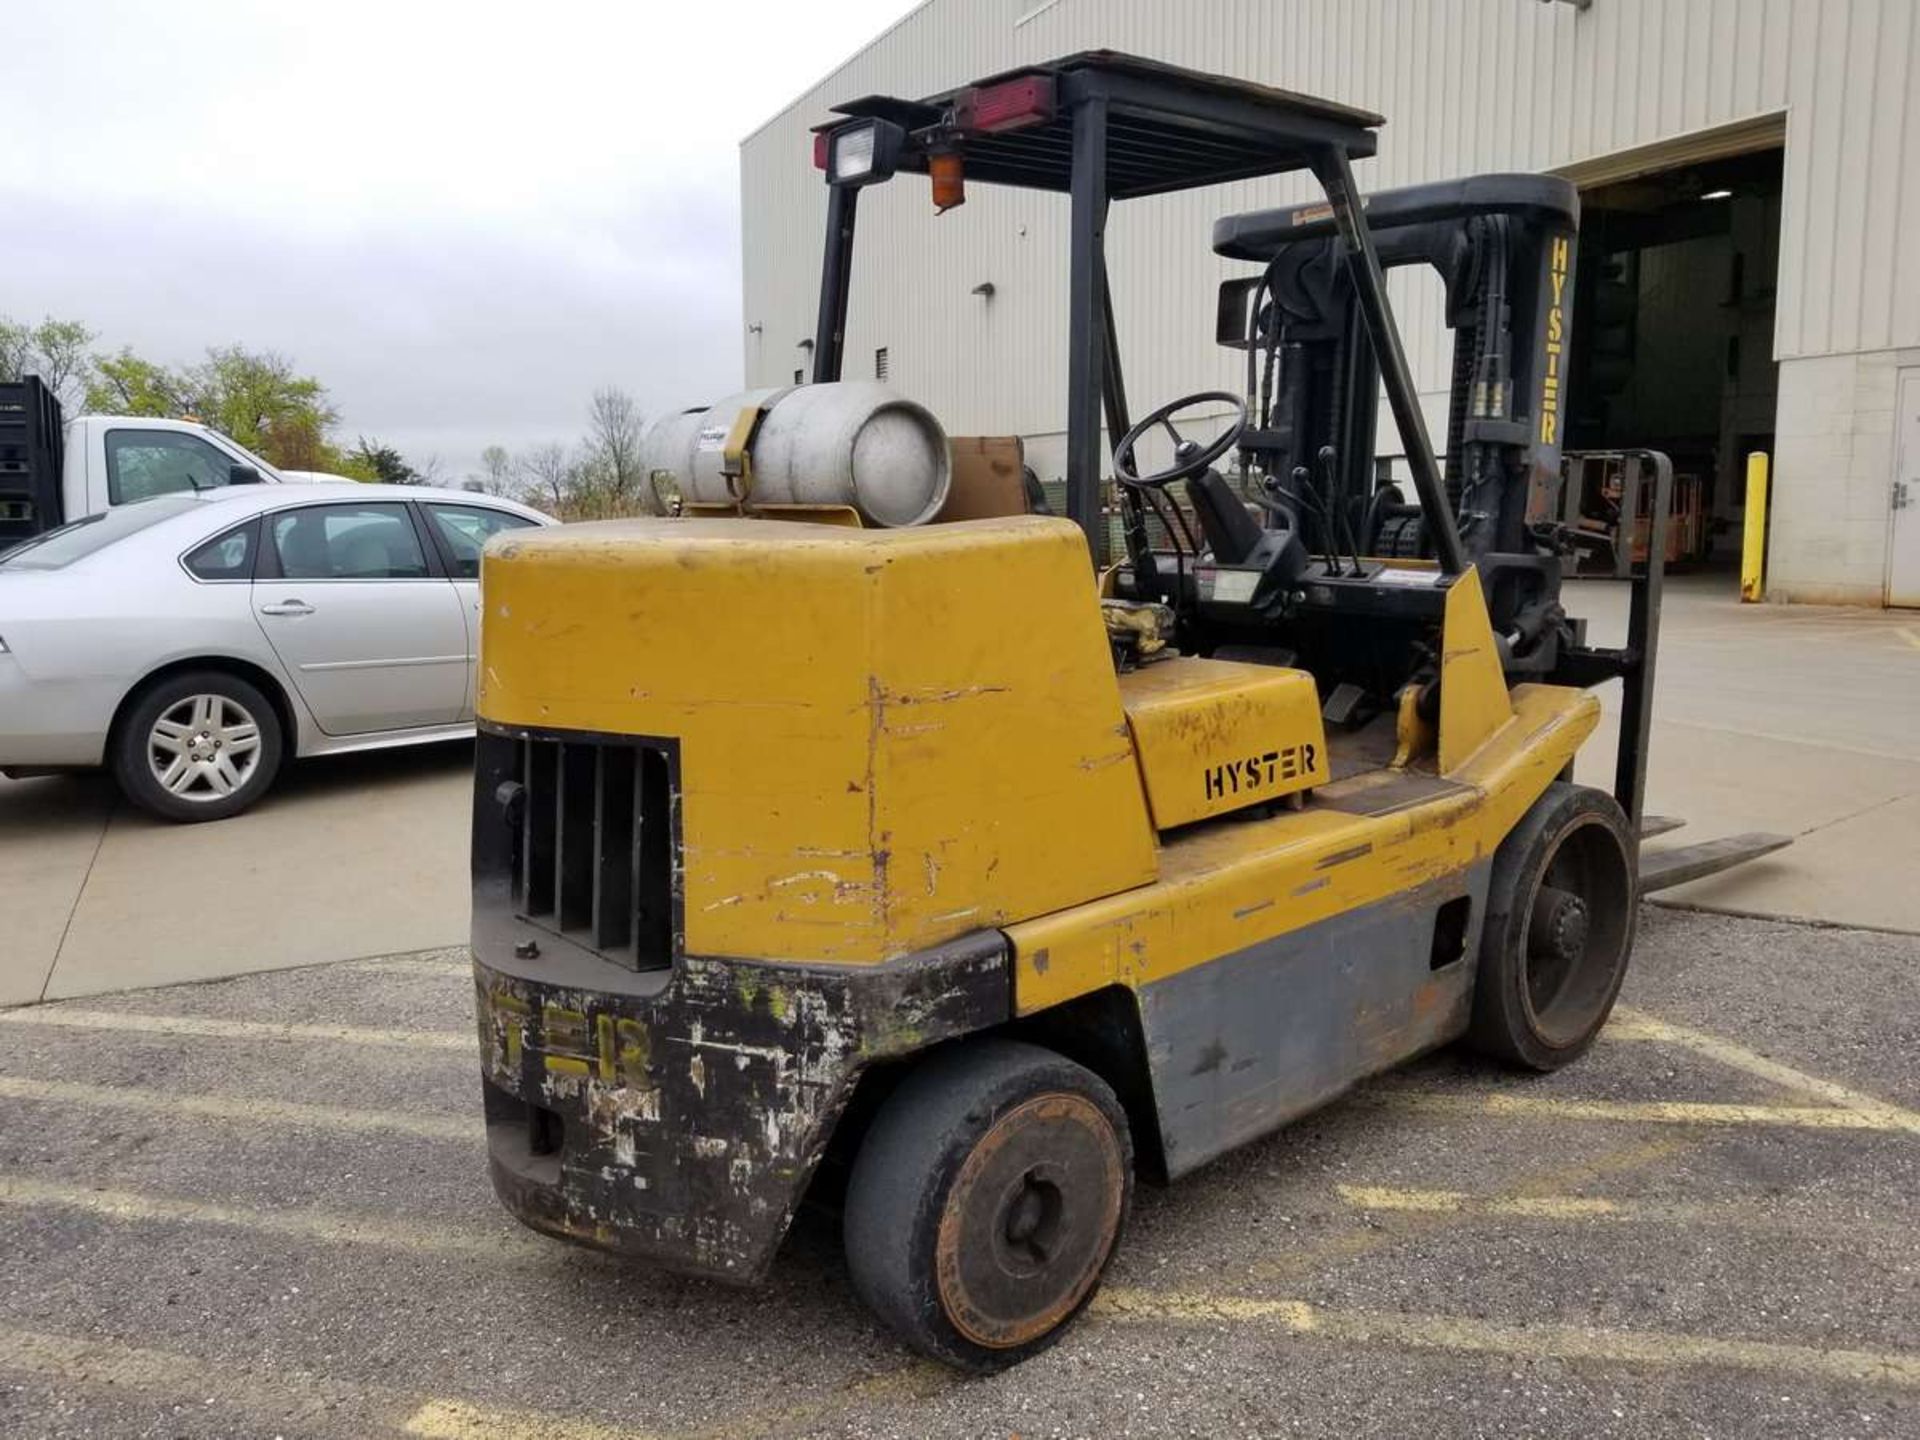 Hyster 5155XL 15,000lb LP Fork Lift - Image 3 of 10